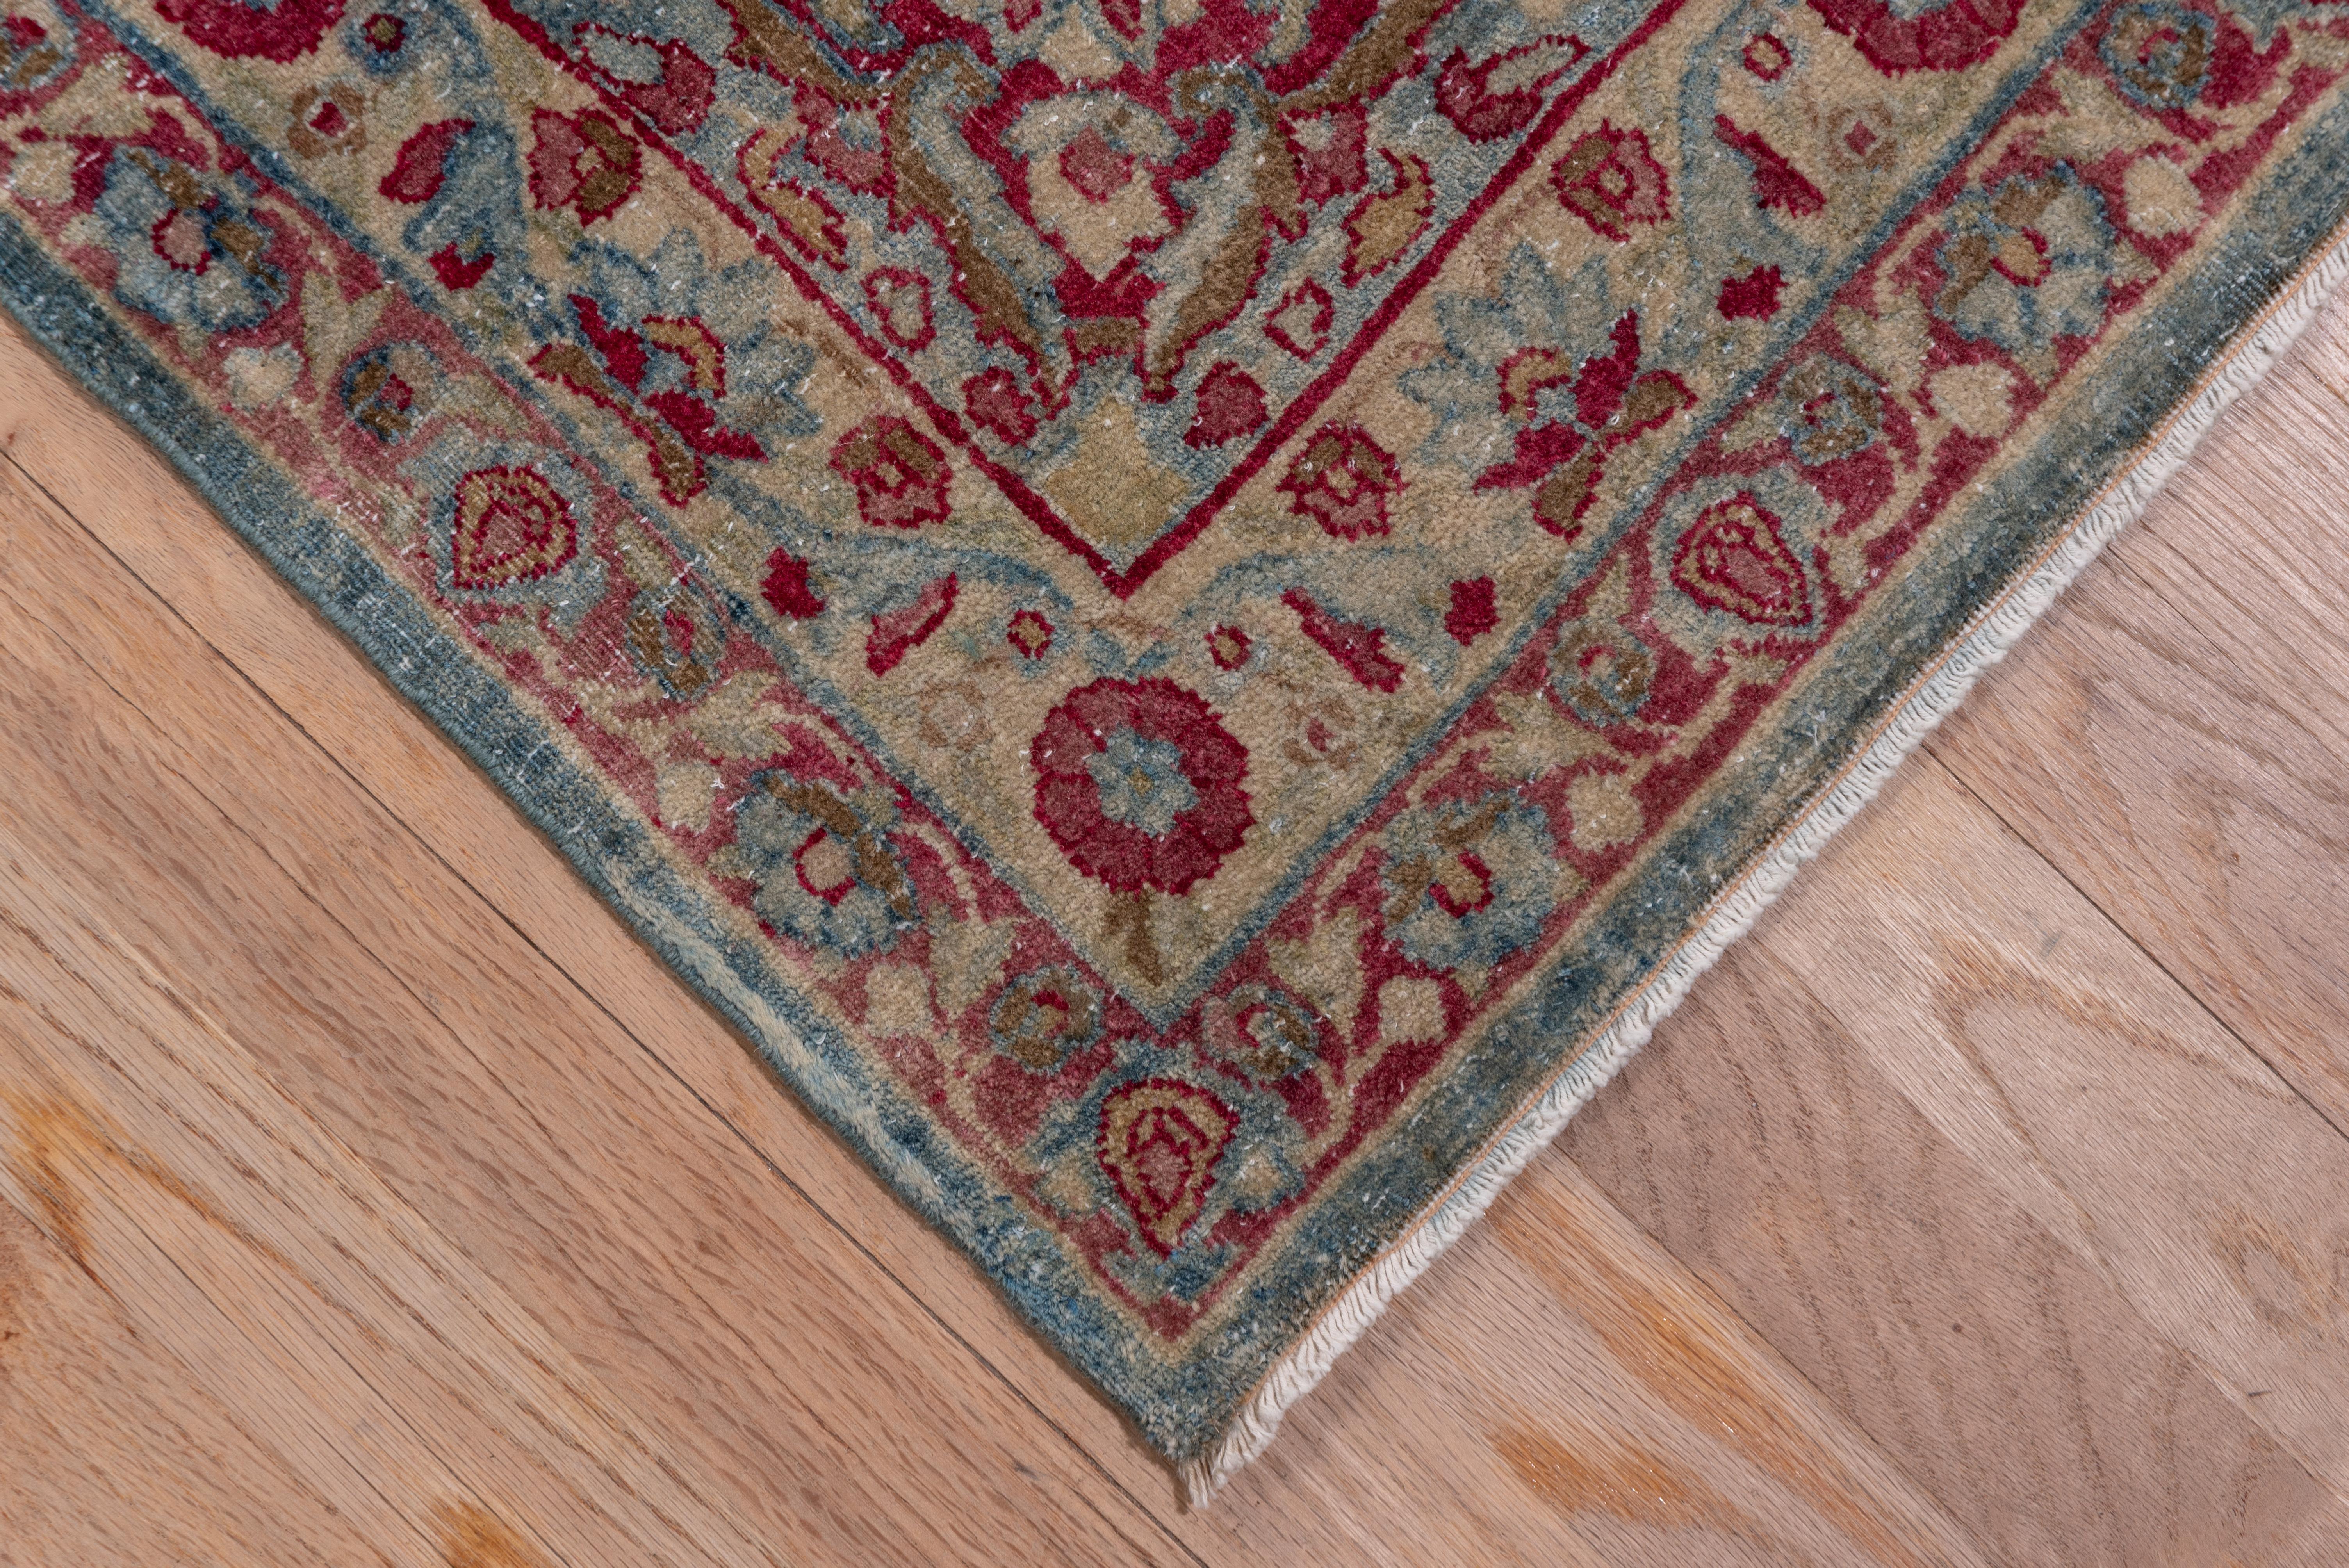 This predominantly light colored southeast Persian town carpet has a wine brown, pale green and ivory nested medallion with lozenge-shaped floral arrays. There are cypress trees in the pale green border as in the central medallion areas of wear,